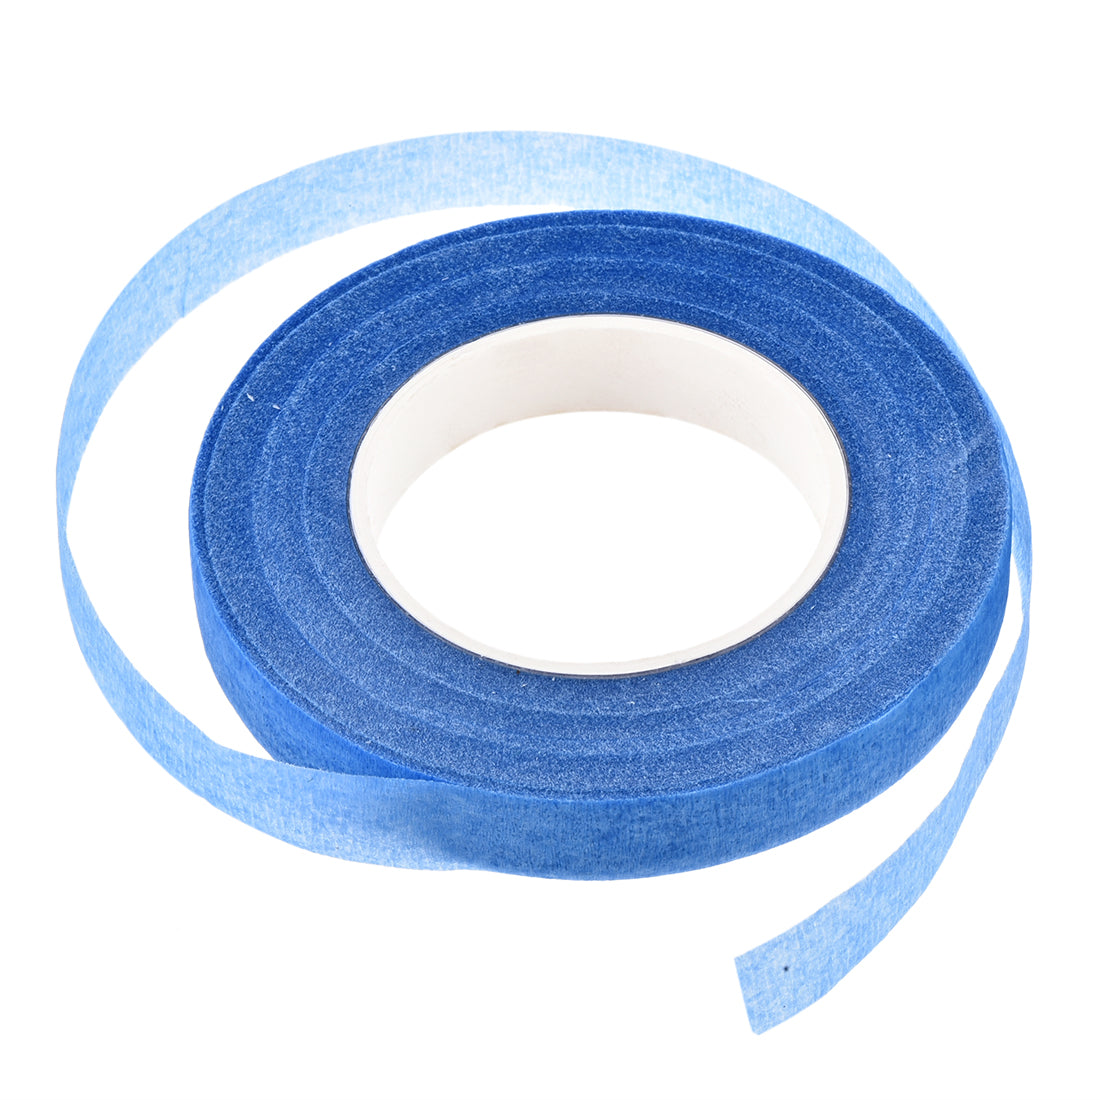 uxcell Uxcell 2Roll 1/2"x30Yard Blue Floral Tape Flower Adhesives Floral Arrangement Kit